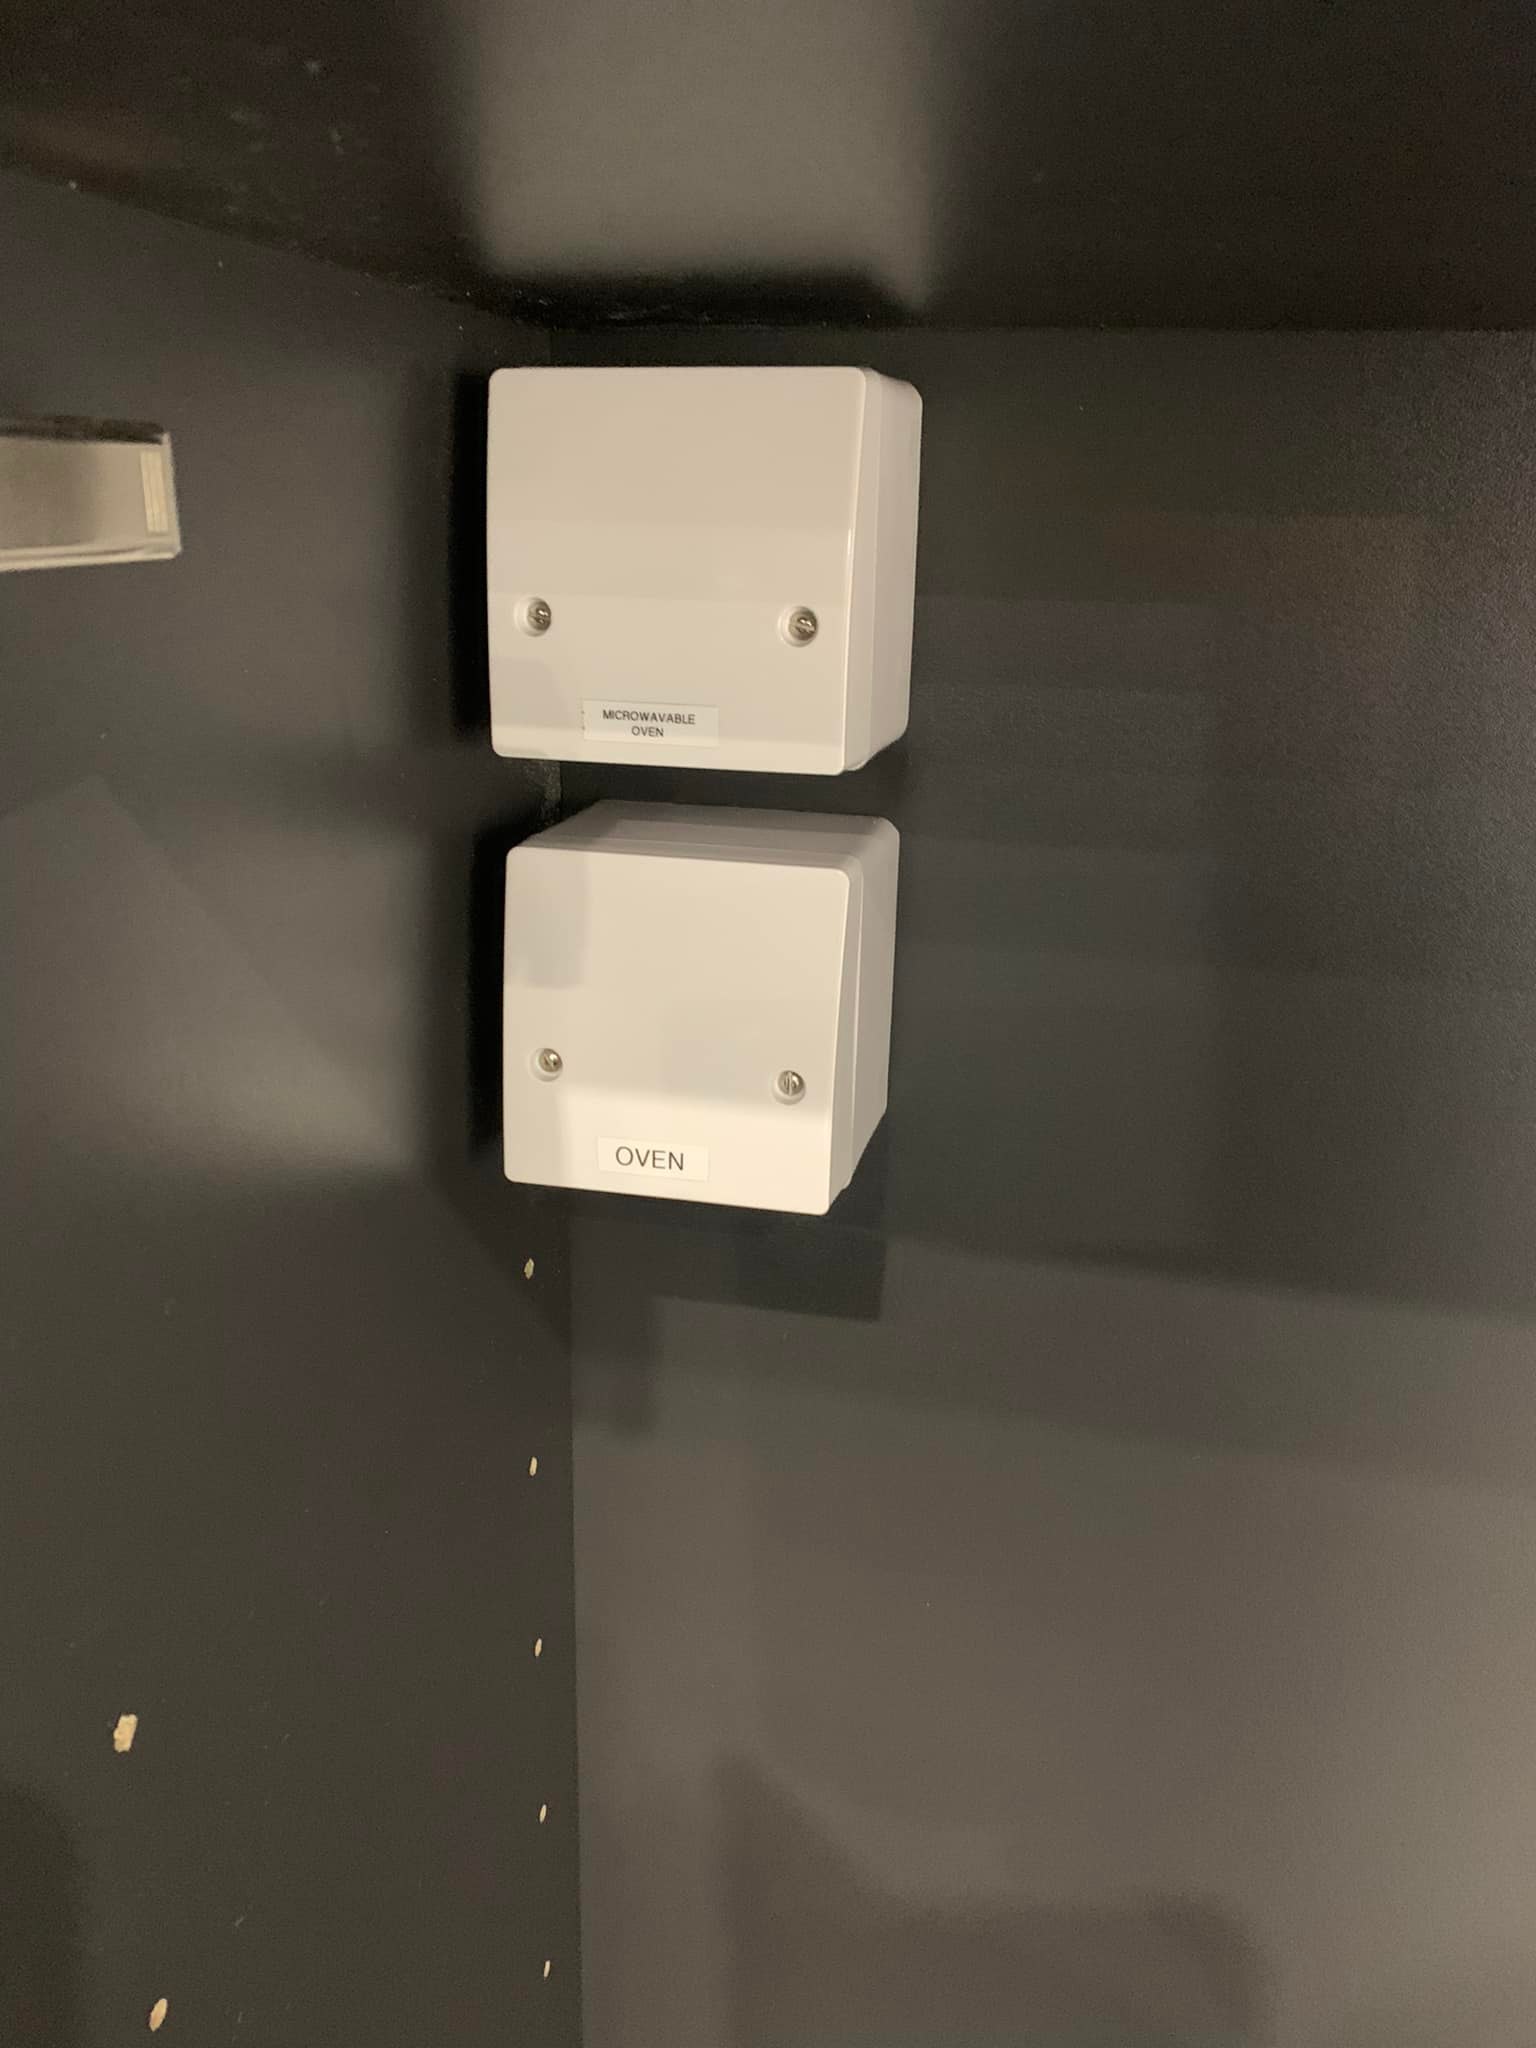 Fuse boxes for microwave and oven, mounted inside a cabinet